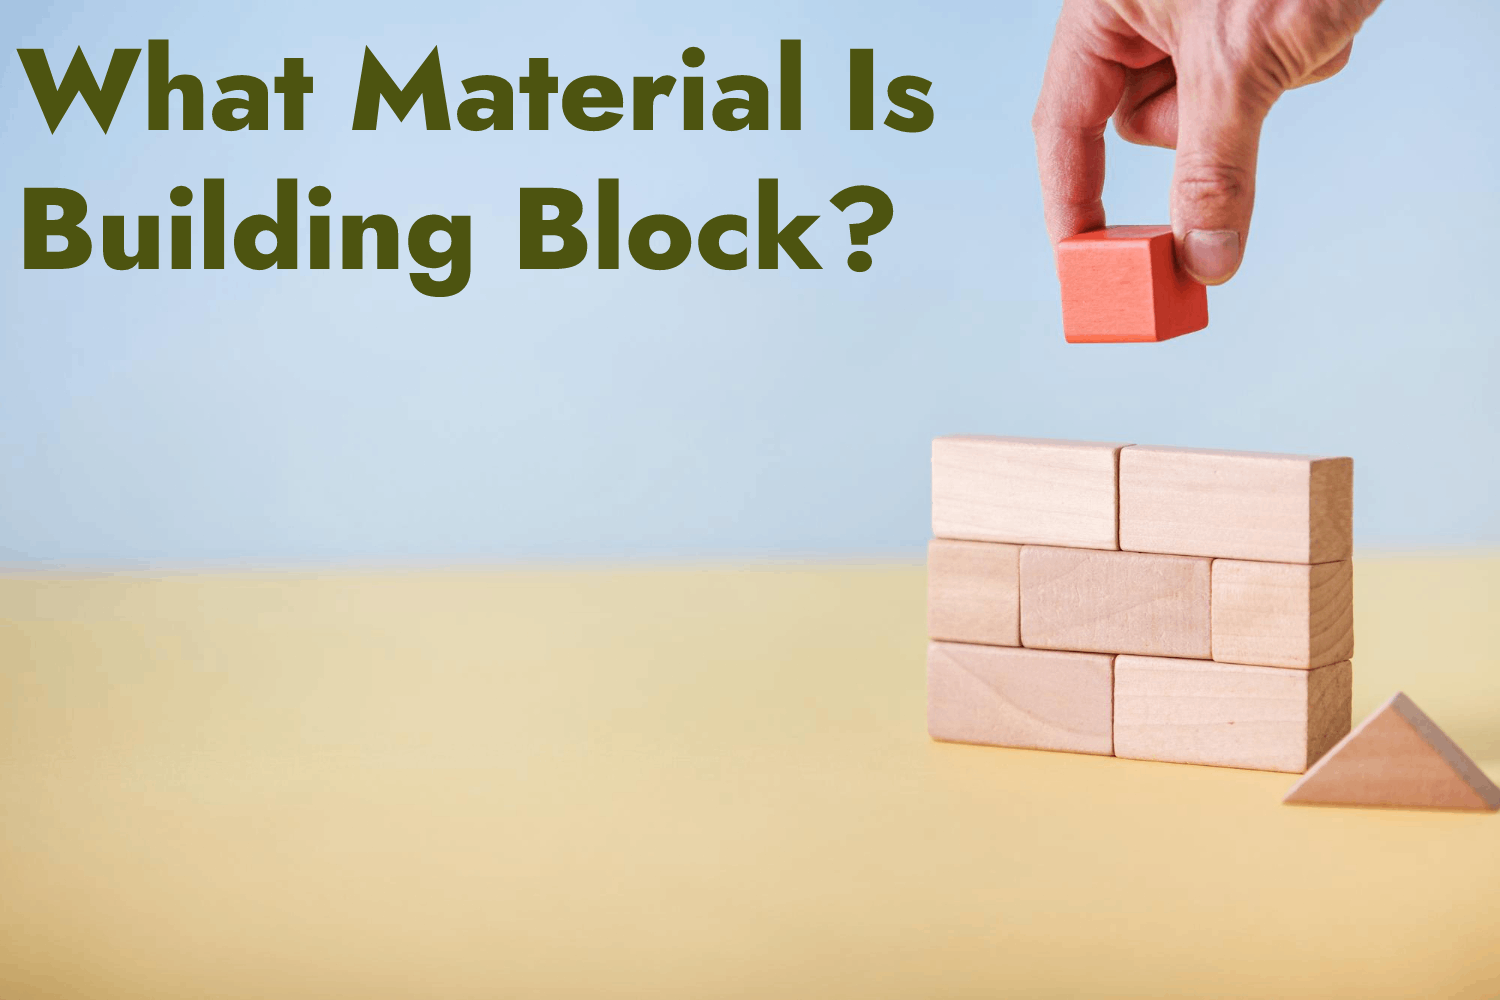 What Material Is Building Block?